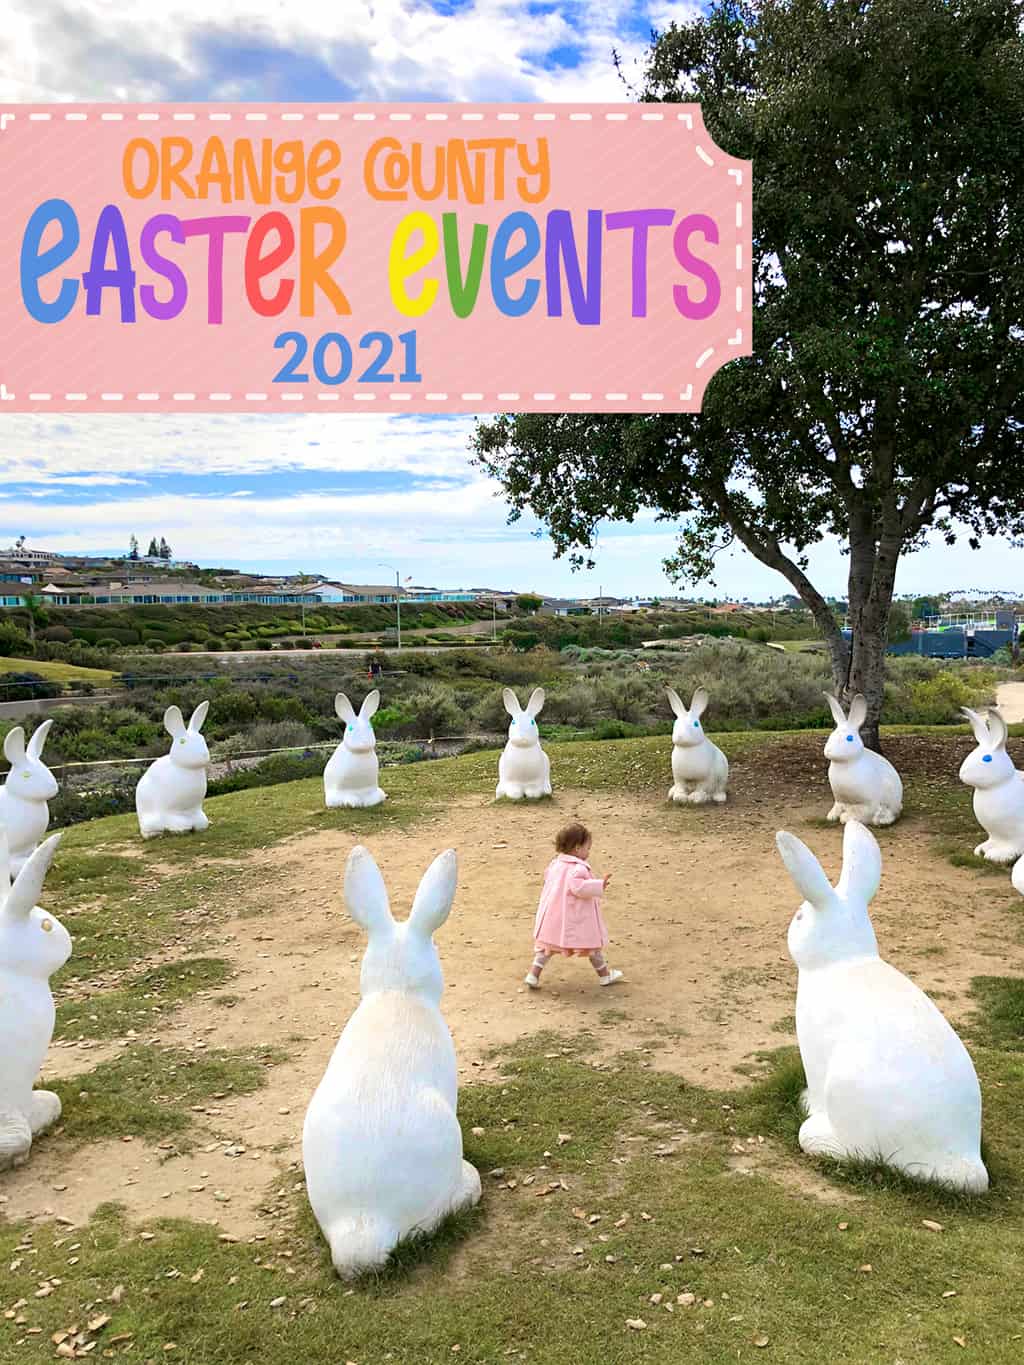 101 Easter Egg Hunts and Spring Events in Orange County